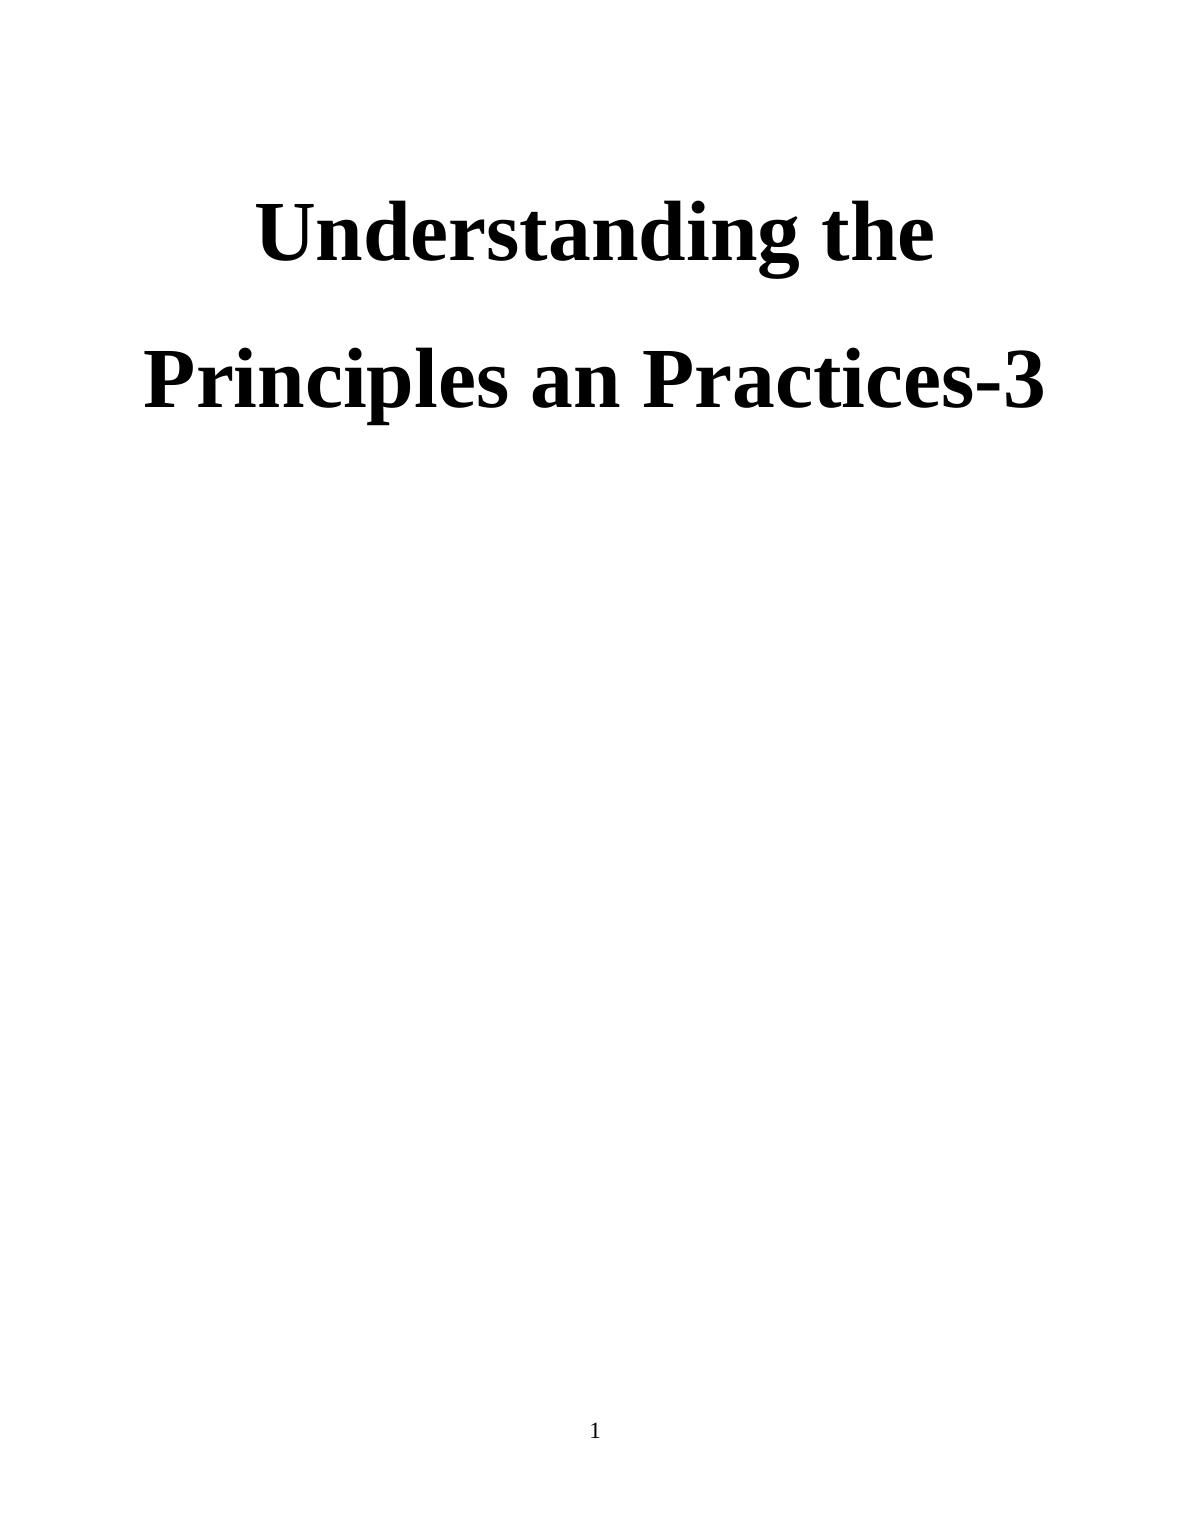 Understanding the Principles and Practices of Assessment_1